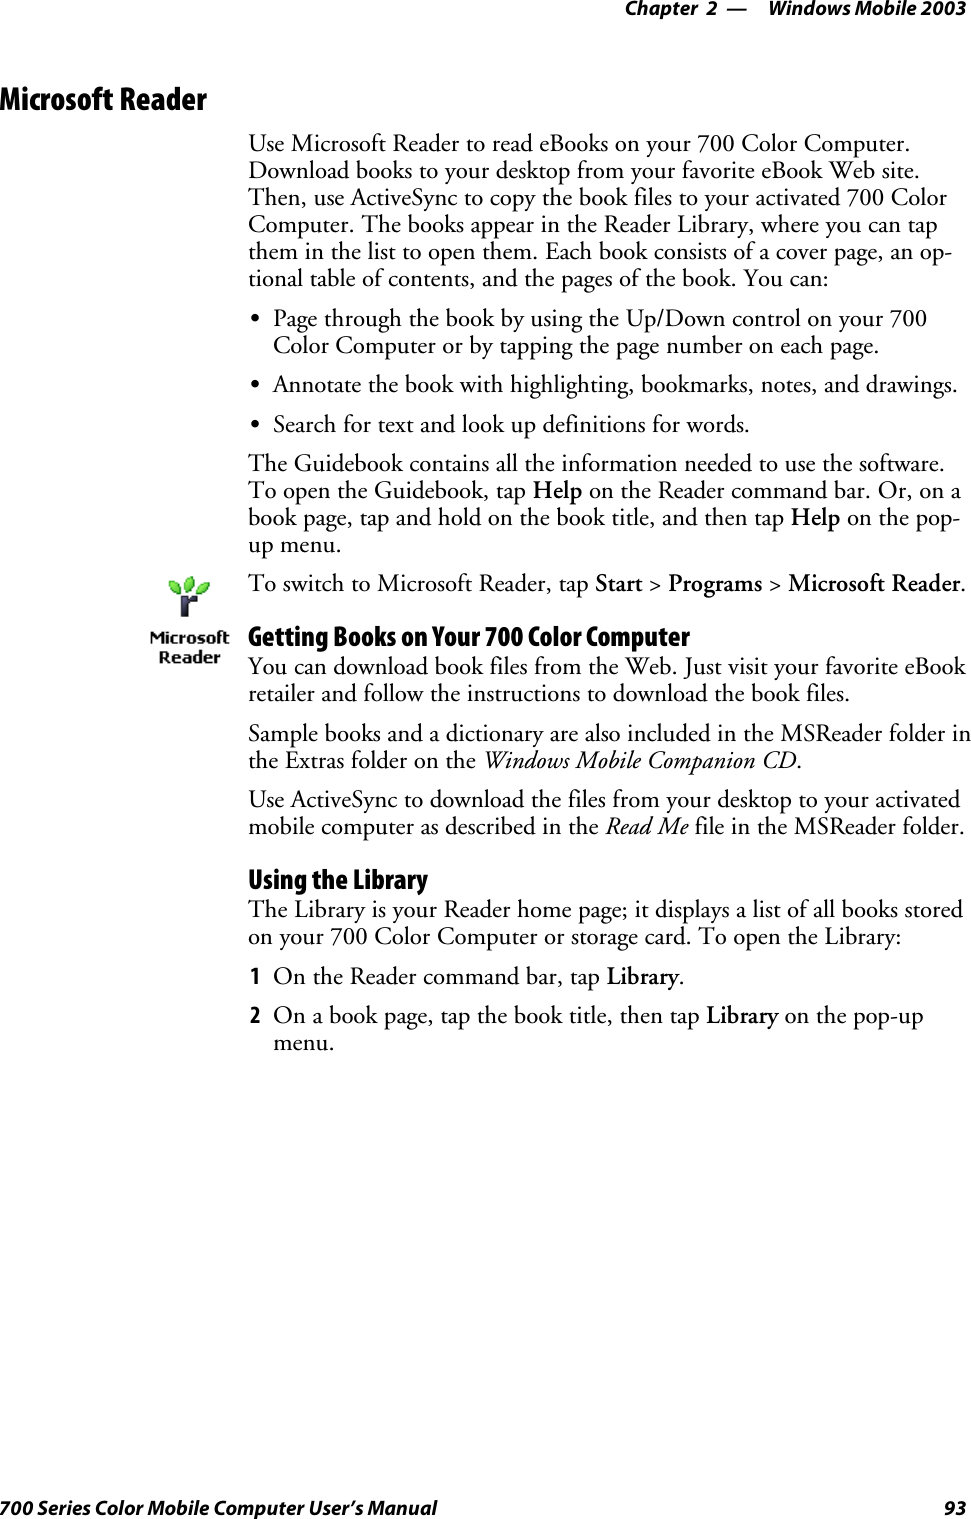 Windows Mobile 2003—Chapter 293700 Series Color Mobile Computer User’s ManualMicrosoft ReaderUse Microsoft Reader to read eBooks on your 700 Color Computer.Download books to your desktop from your favorite eBook Web site.Then, use ActiveSync to copy the book files to your activated 700 ColorComputer. The books appear in the Reader Library, where you can tapthem in the list to open them. Each book consists of a cover page, an op-tional table of contents, and the pages of the book. You can:SPage through the book by using the Up/Down control on your 700ColorComputerorbytappingthepagenumberoneachpage.SAnnotate the book with highlighting, bookmarks, notes, and drawings.SSearch for text and look up definitions for words.The Guidebook contains all the information needed to use the software.To open the Guidebook, tap Help on the Reader command bar. Or, on abook page, tap and hold on the book title, and then tap Help on the pop-up menu.To switch to Microsoft Reader, tap Start &gt;Programs &gt;Microsoft Reader.Getting Books on Your 700 Color ComputerYou can download book files from the Web. Just visit your favorite eBookretailer and follow the instructions to download the book files.Sample books and a dictionary are also included in the MSReader folder inthe Extras folder on the Windows Mobile Companion CD.Use ActiveSync to download the files from your desktop to your activatedmobile computer as described in the Read Me file in the MSReader folder.Using the LibraryThe Library is your Reader home page; it displays a list of all books storedonyour700ColorComputerorstoragecard.ToopentheLibrary:1On the Reader command bar, tap Library.2On a book page, tap the book title, then tap Library on the pop-upmenu.